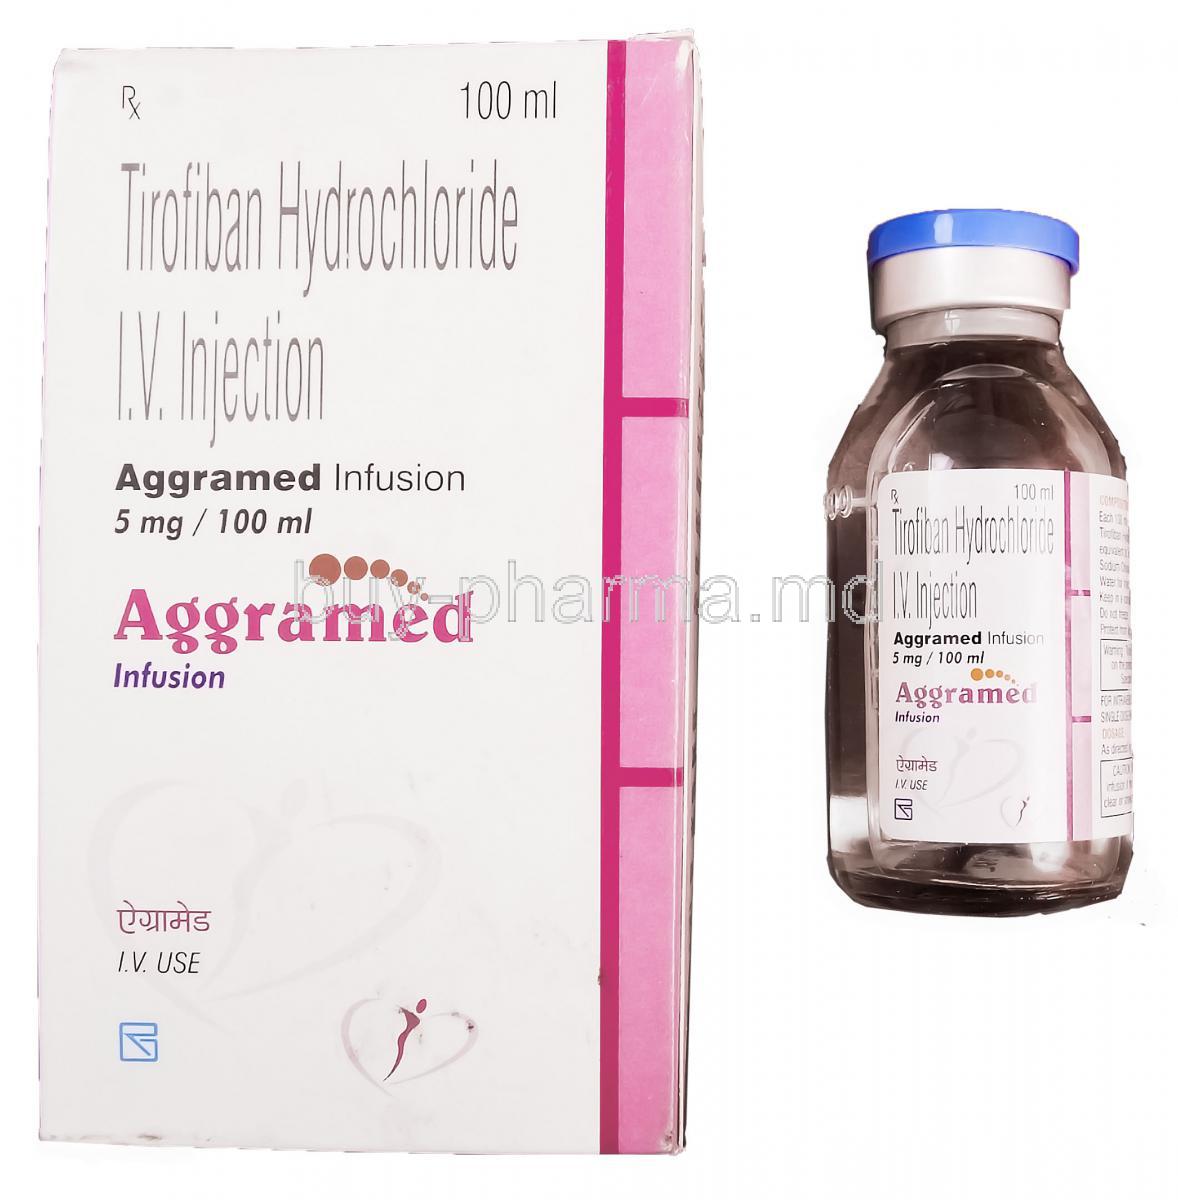 Aggramed Infusion, Generic Aggrastat, Tirofiban Hydrochloride Injection 5mg per 100ml